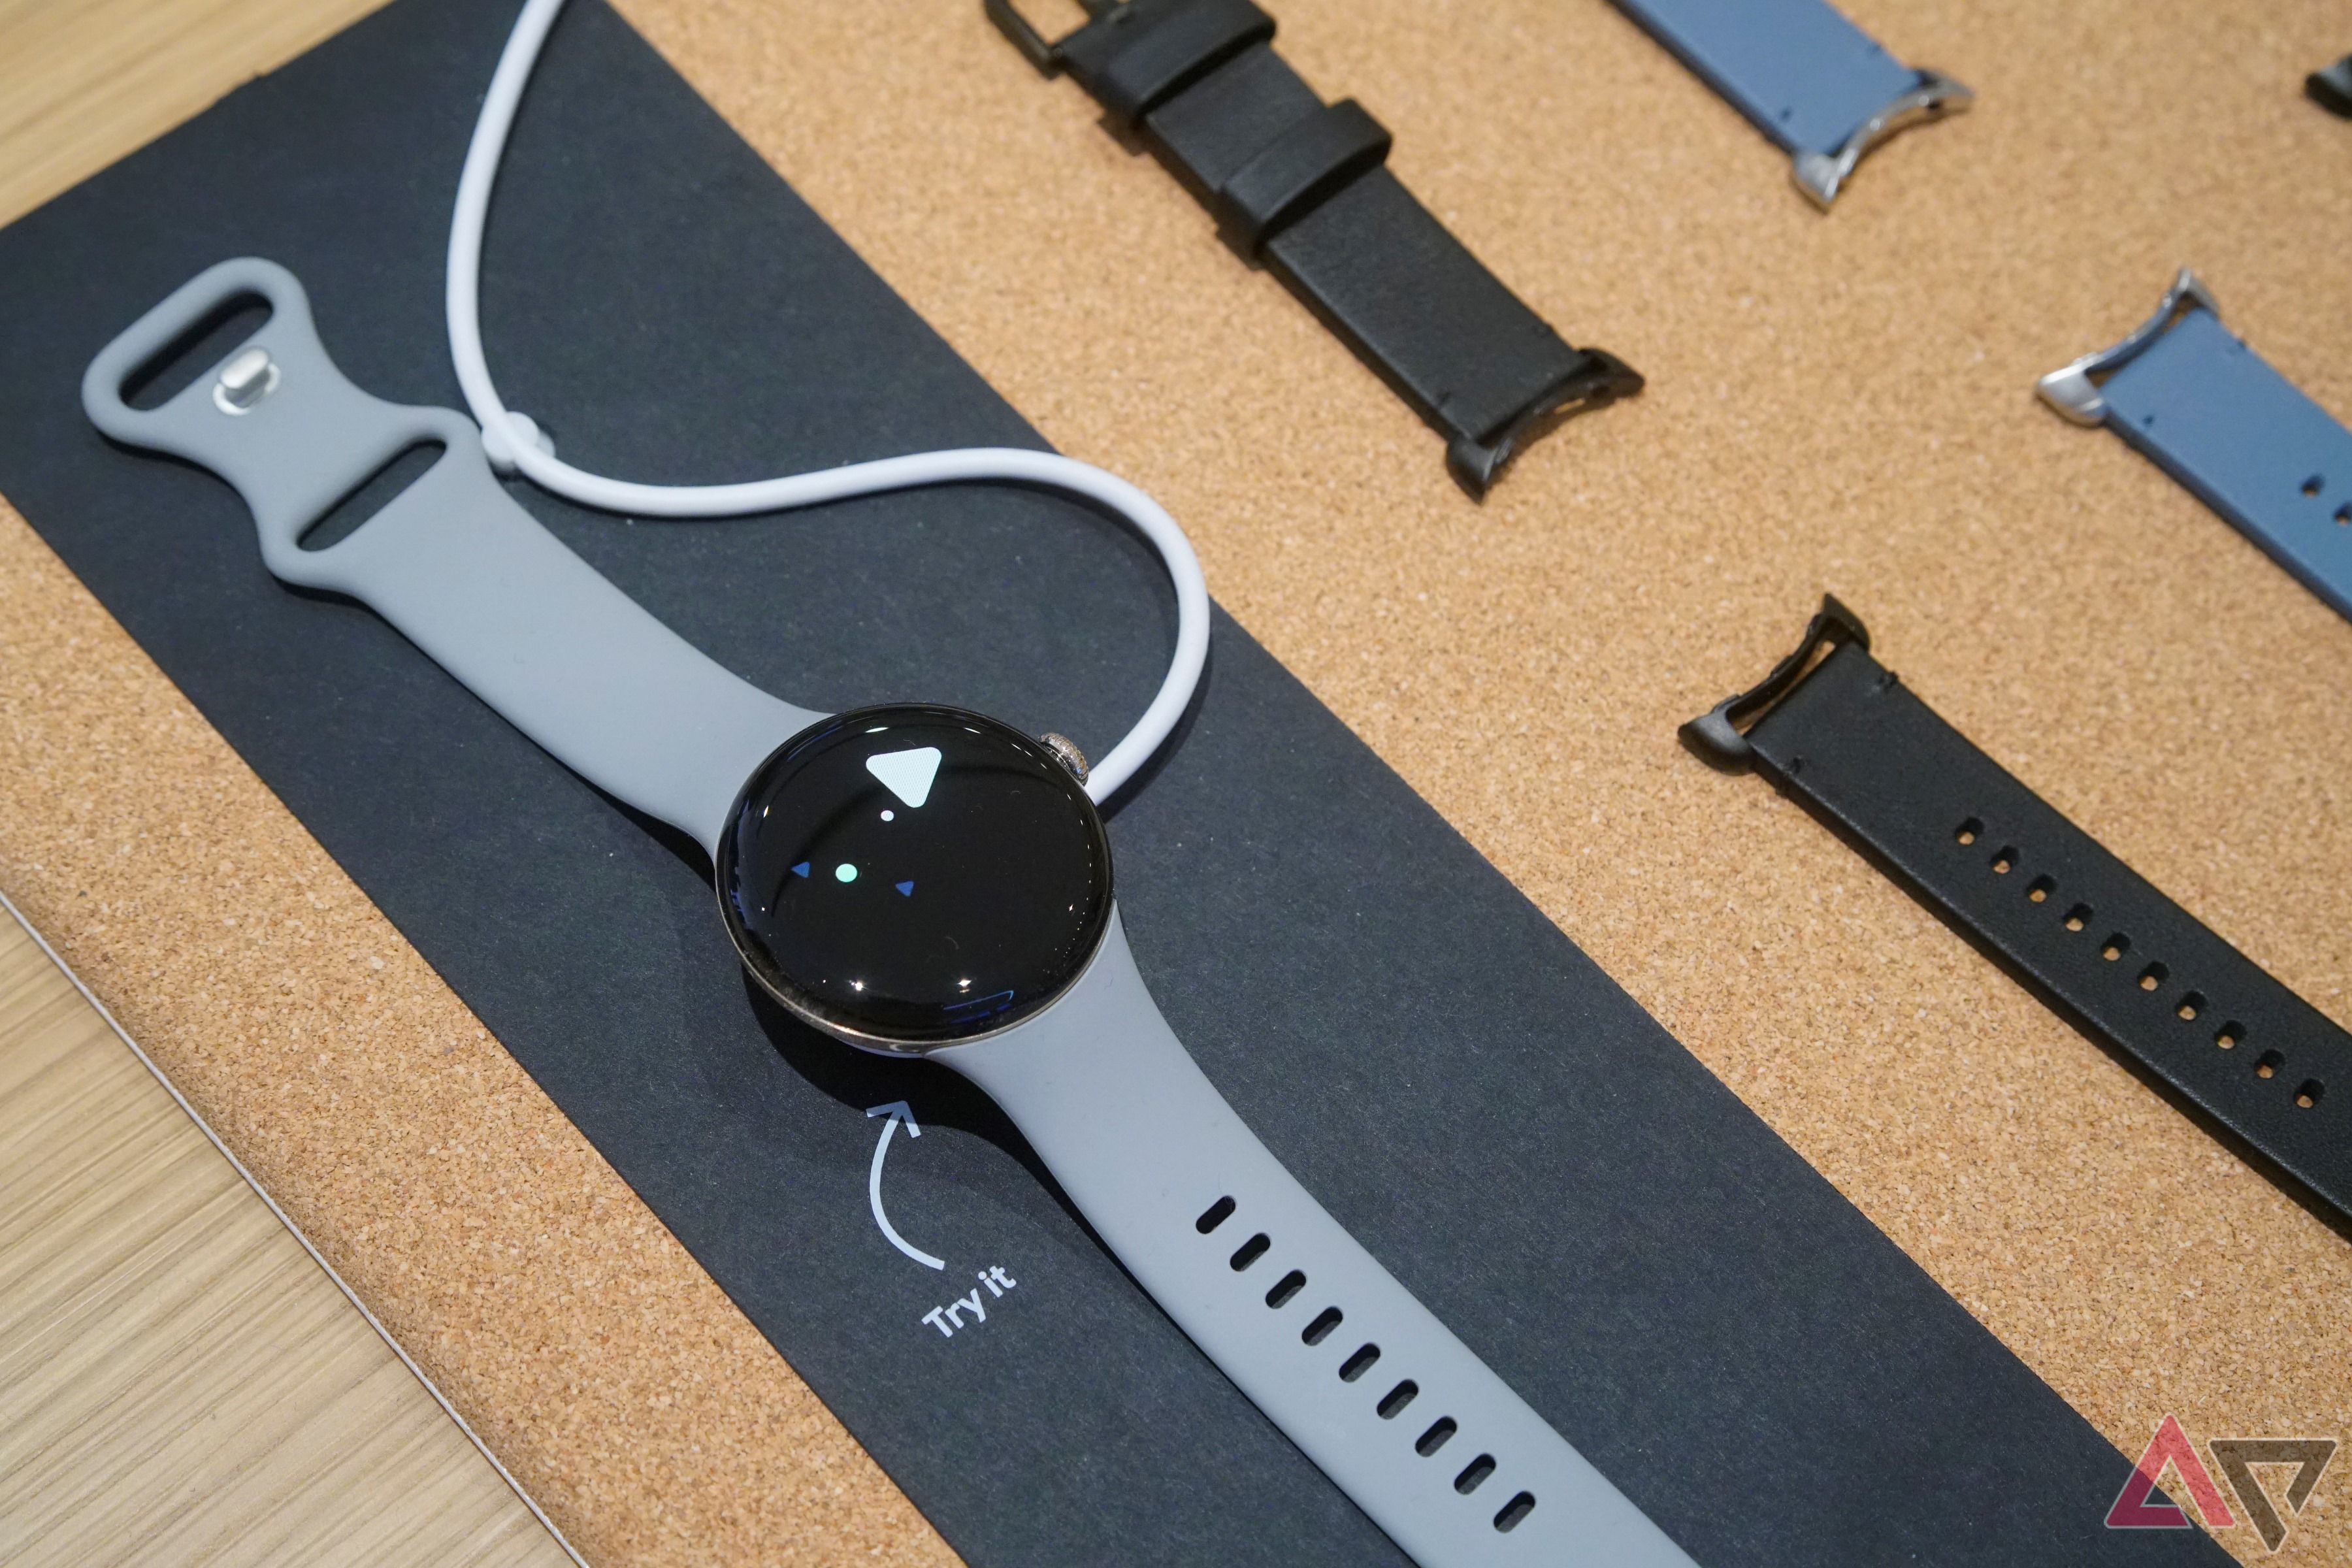 A Pixel Watch 2 laid out on a retail demonstration table.